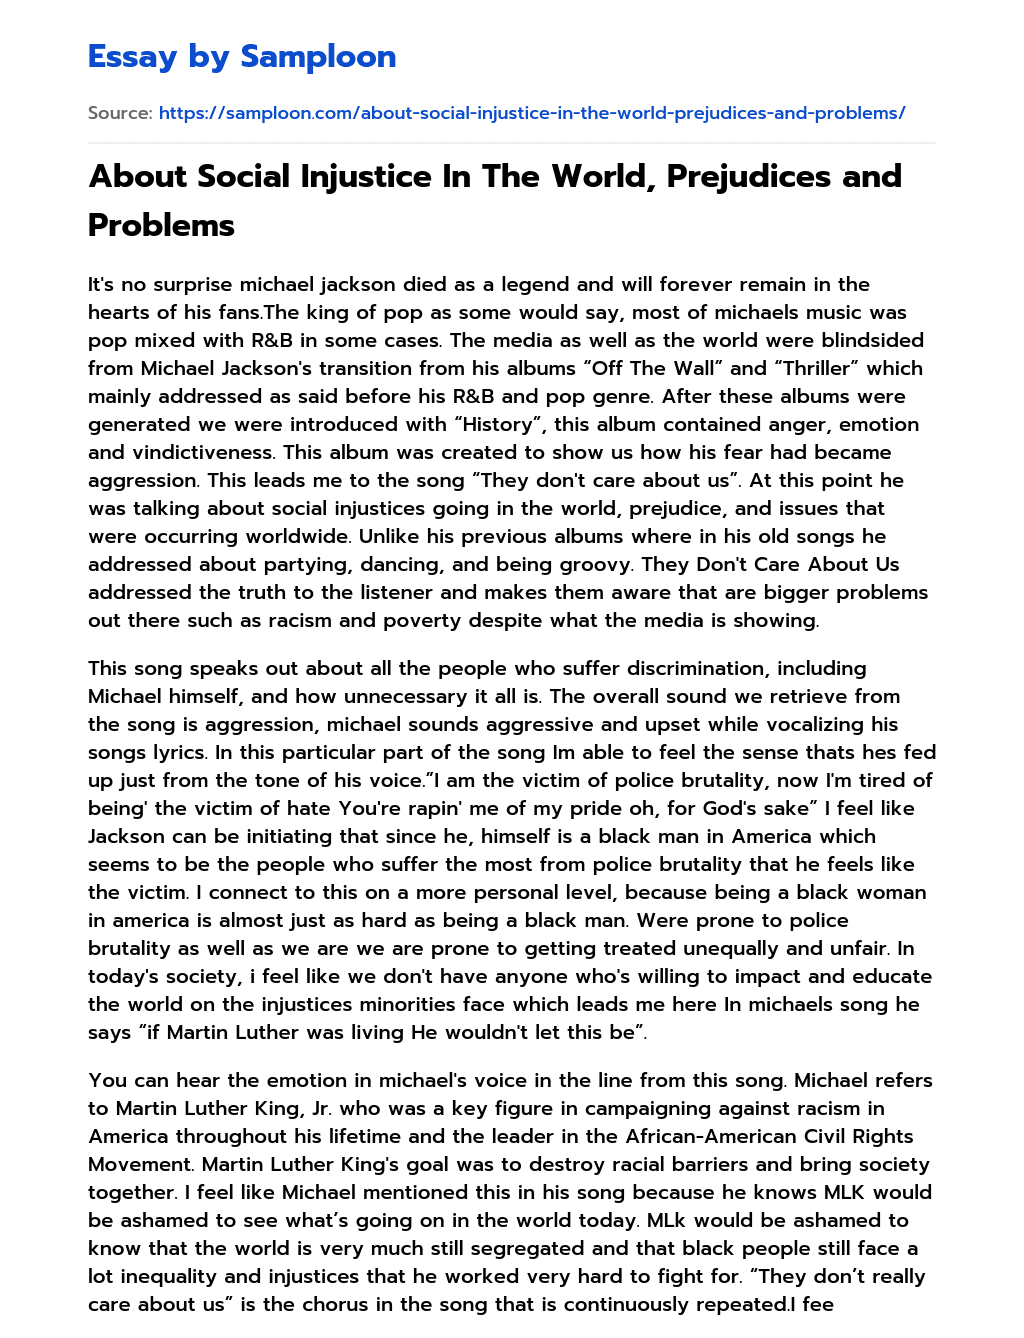 About Social Injustice In The World, Prejudices and Problems essay